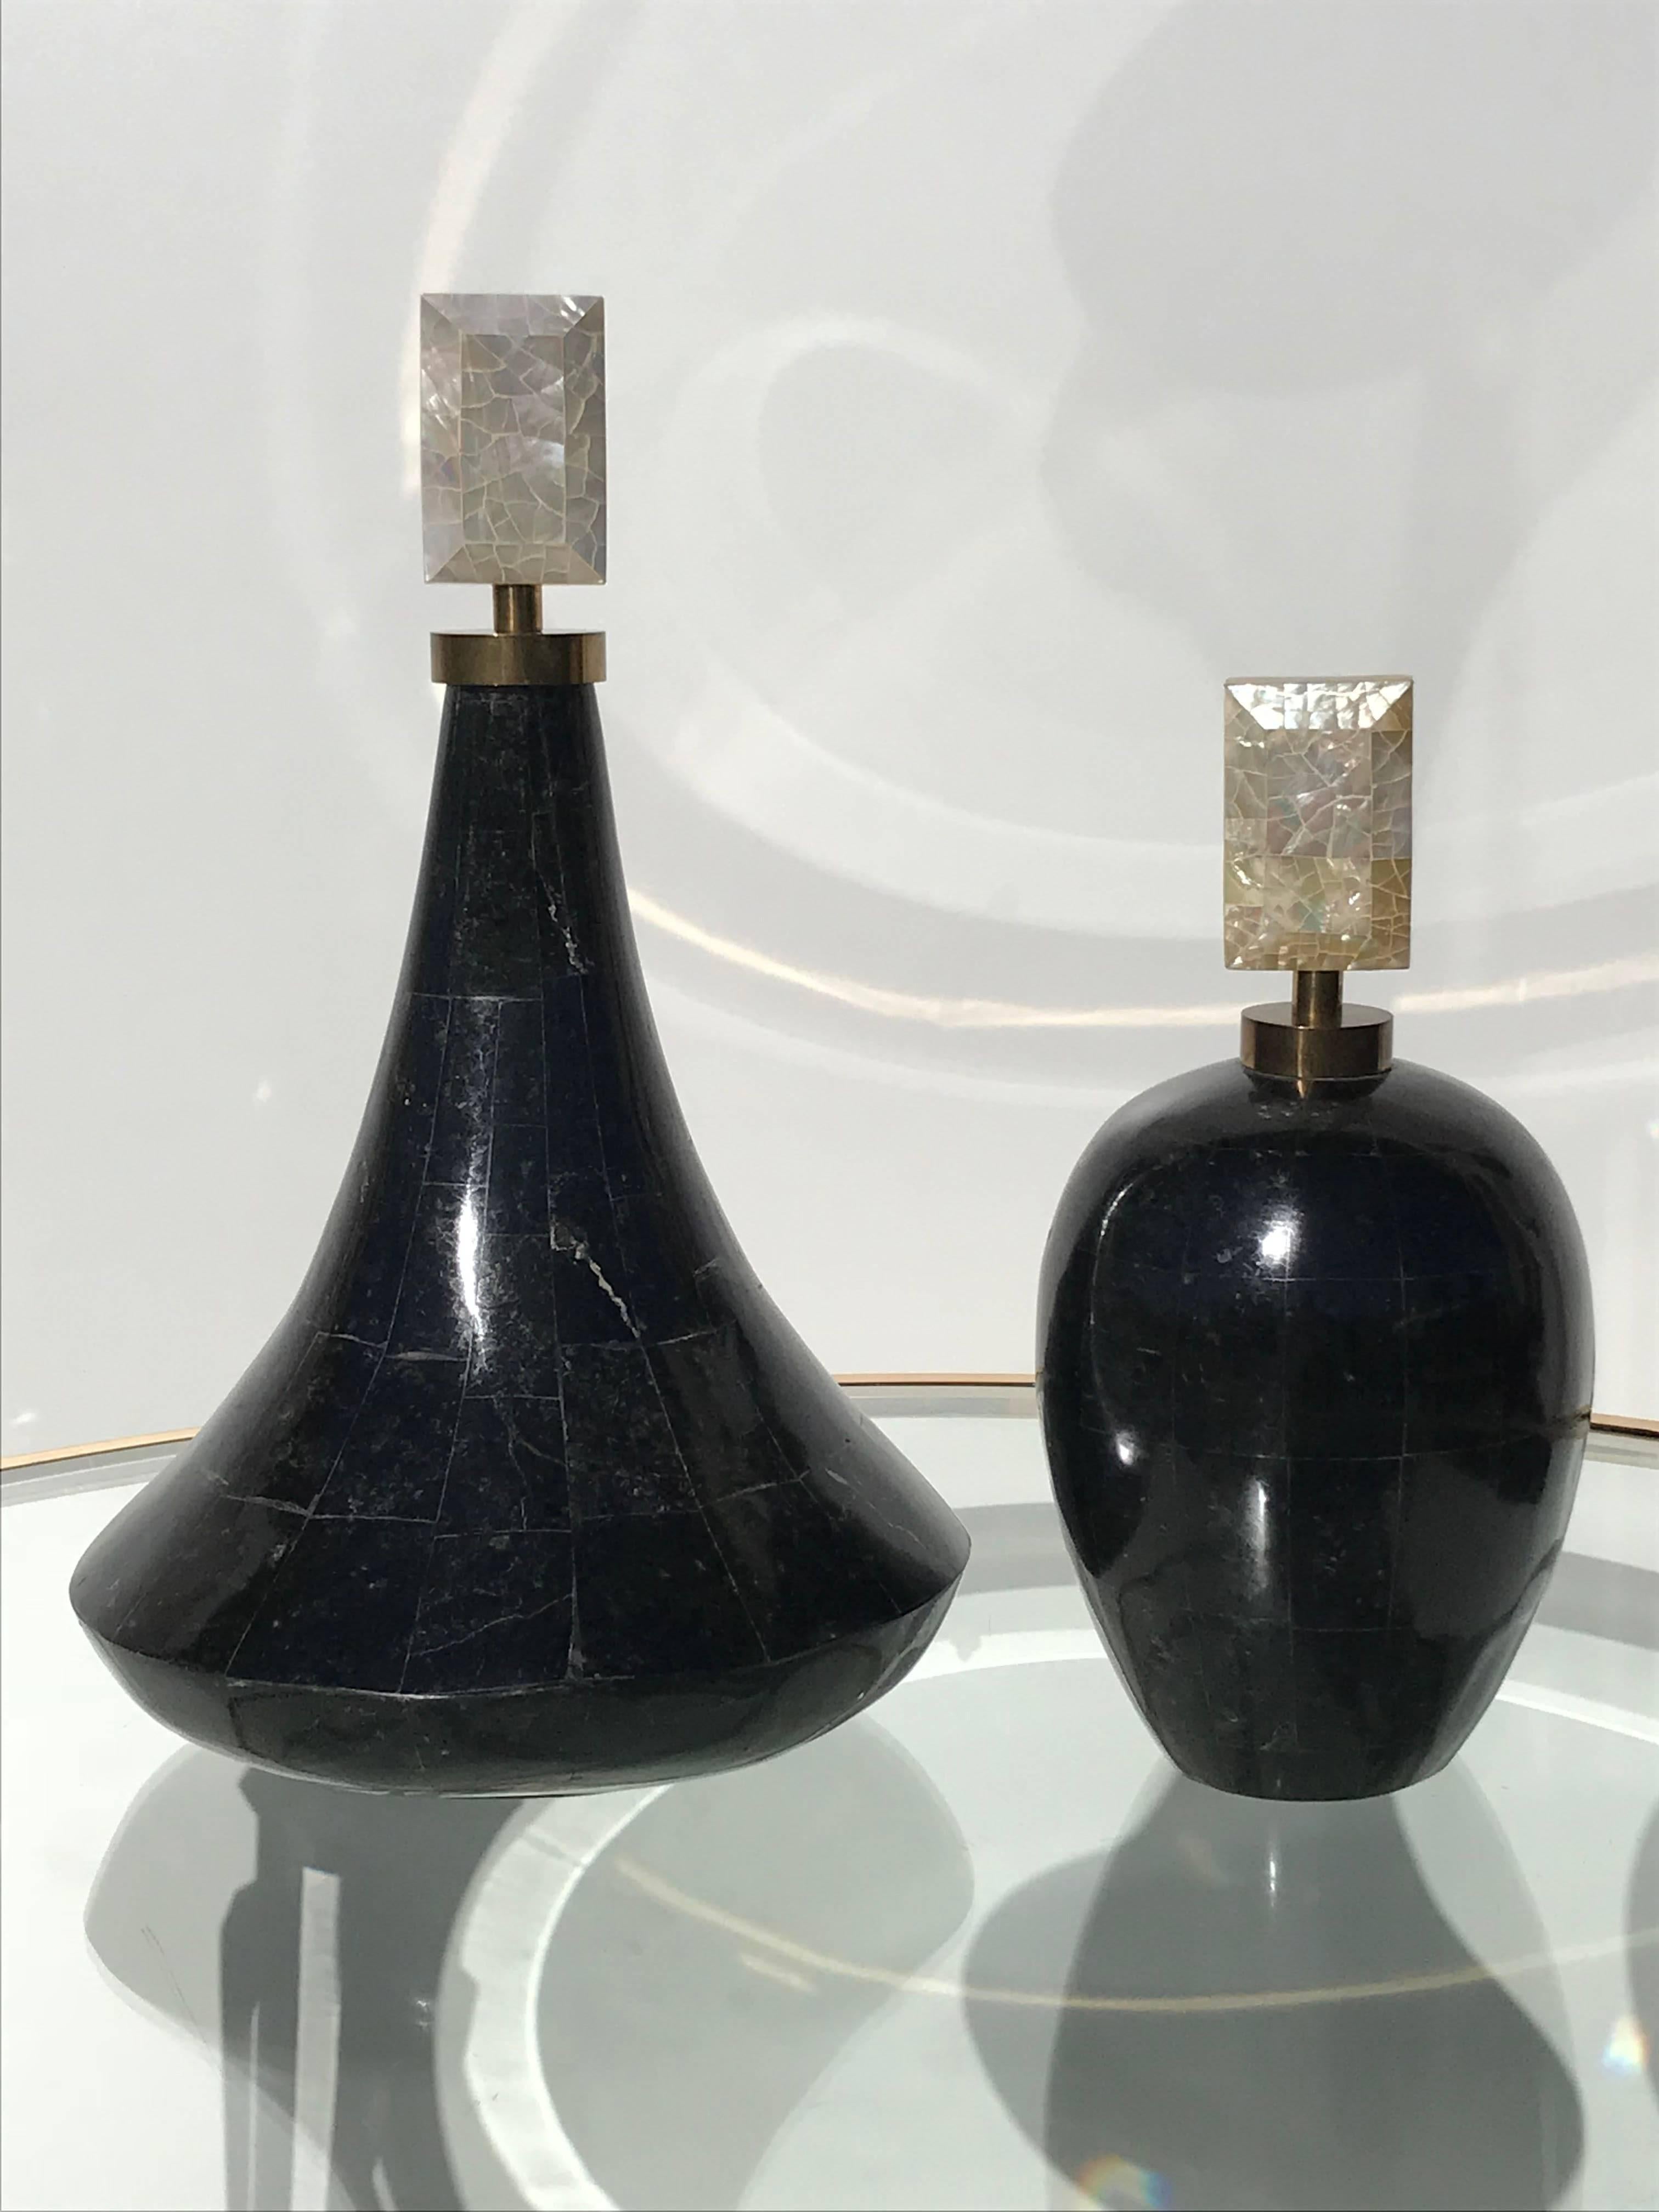 Two tessellated stone decorative perfume bottles by Maitland Smith
Measures: Large bottle measures 15 inches high by 9 inches diameter.
Small bottle 11 inches high by 6 inches diameter.